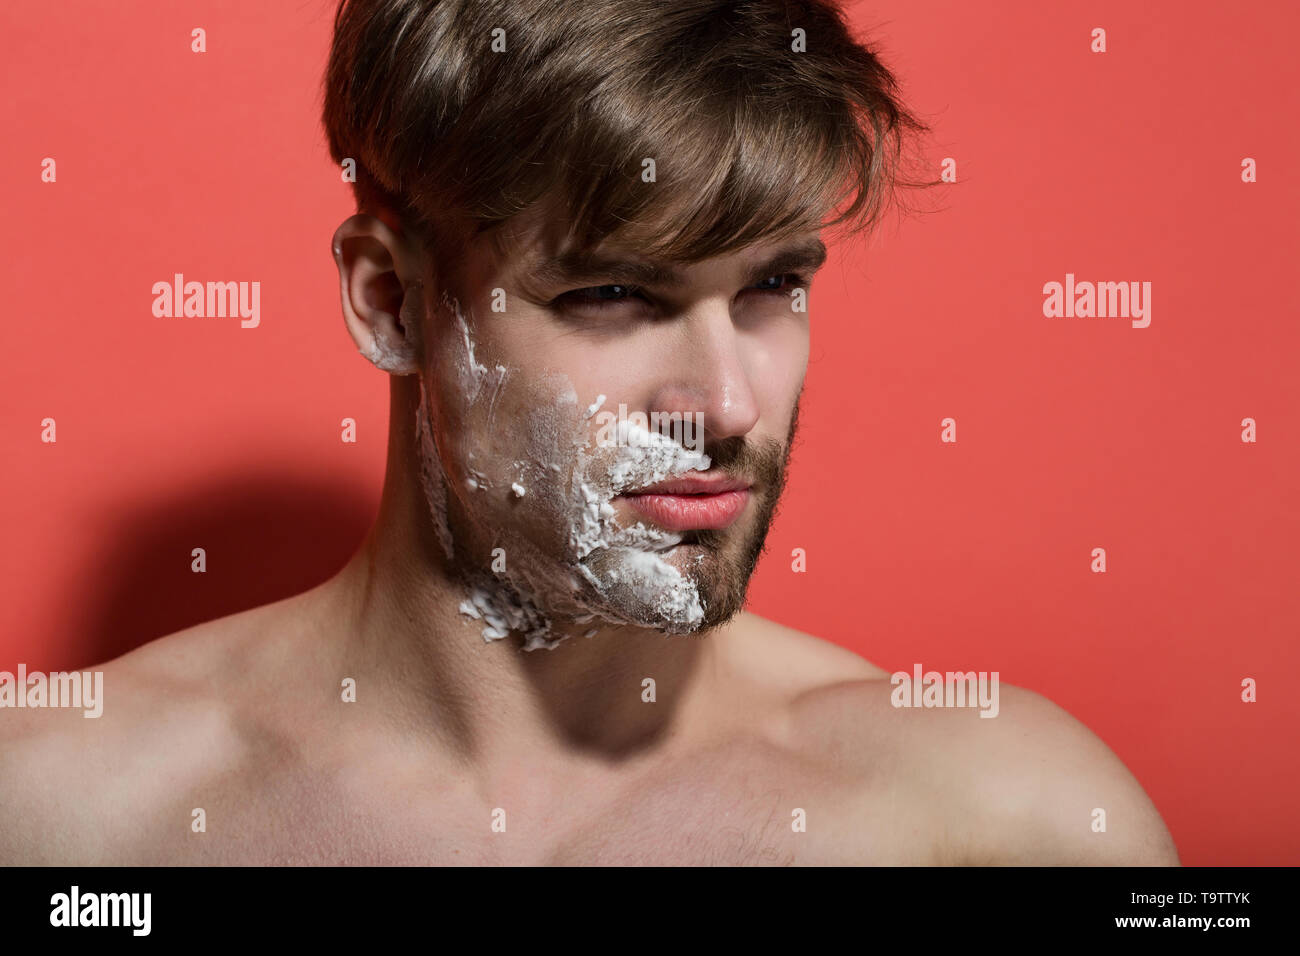 Man face half shaved and bearded with shaving cream Stock Photo